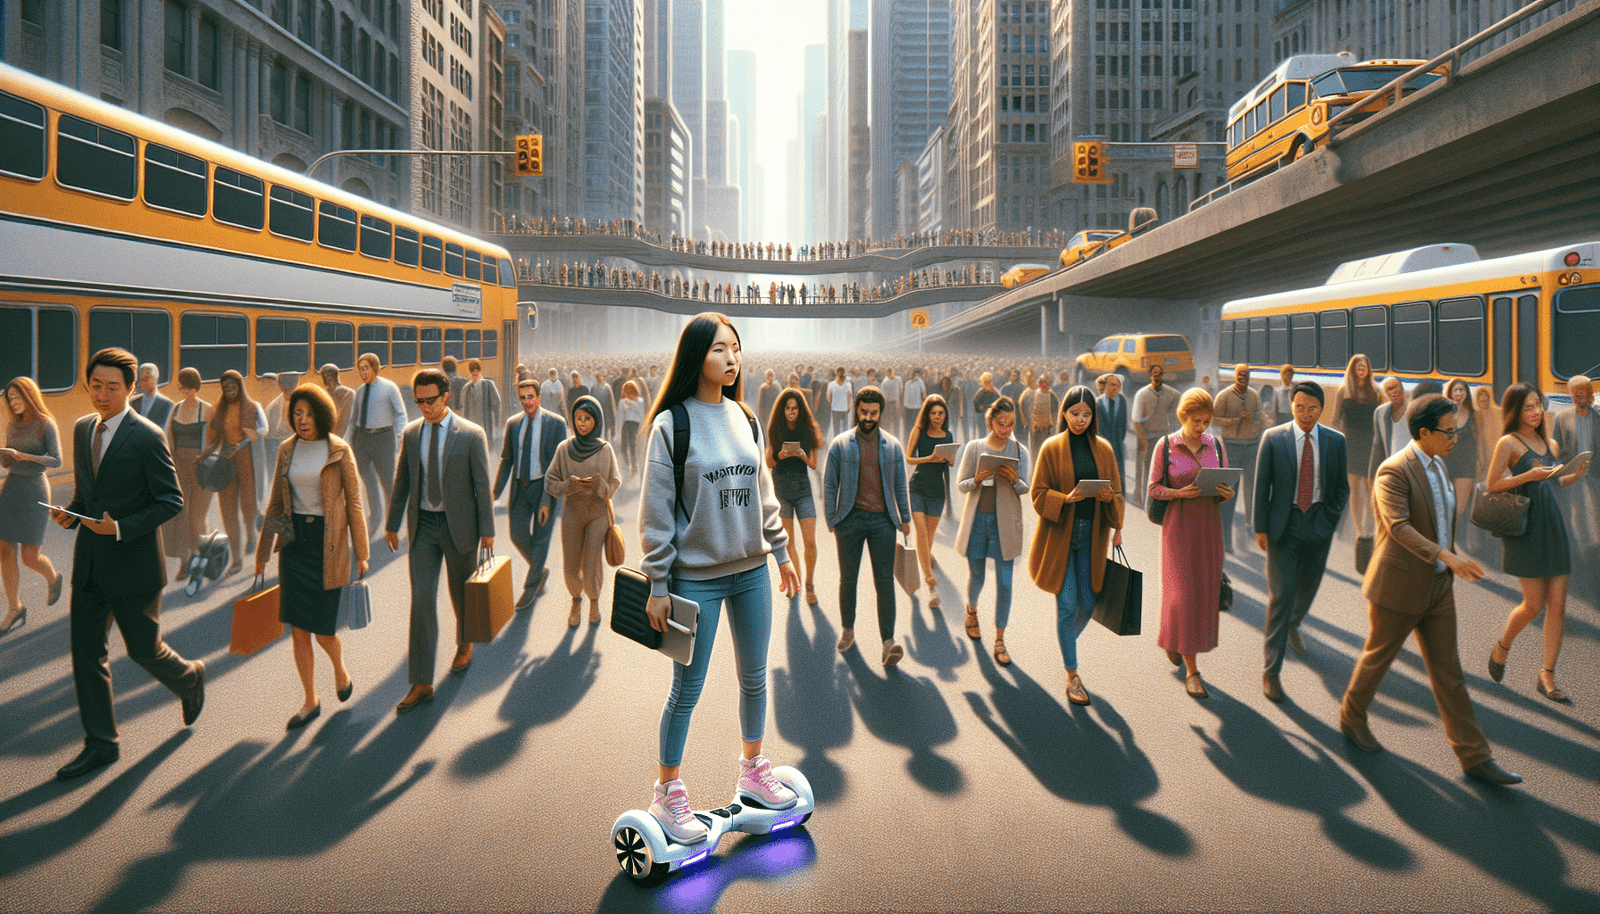 Can I Use A Hoverboard On Public Transportation Like Buses And Trains?